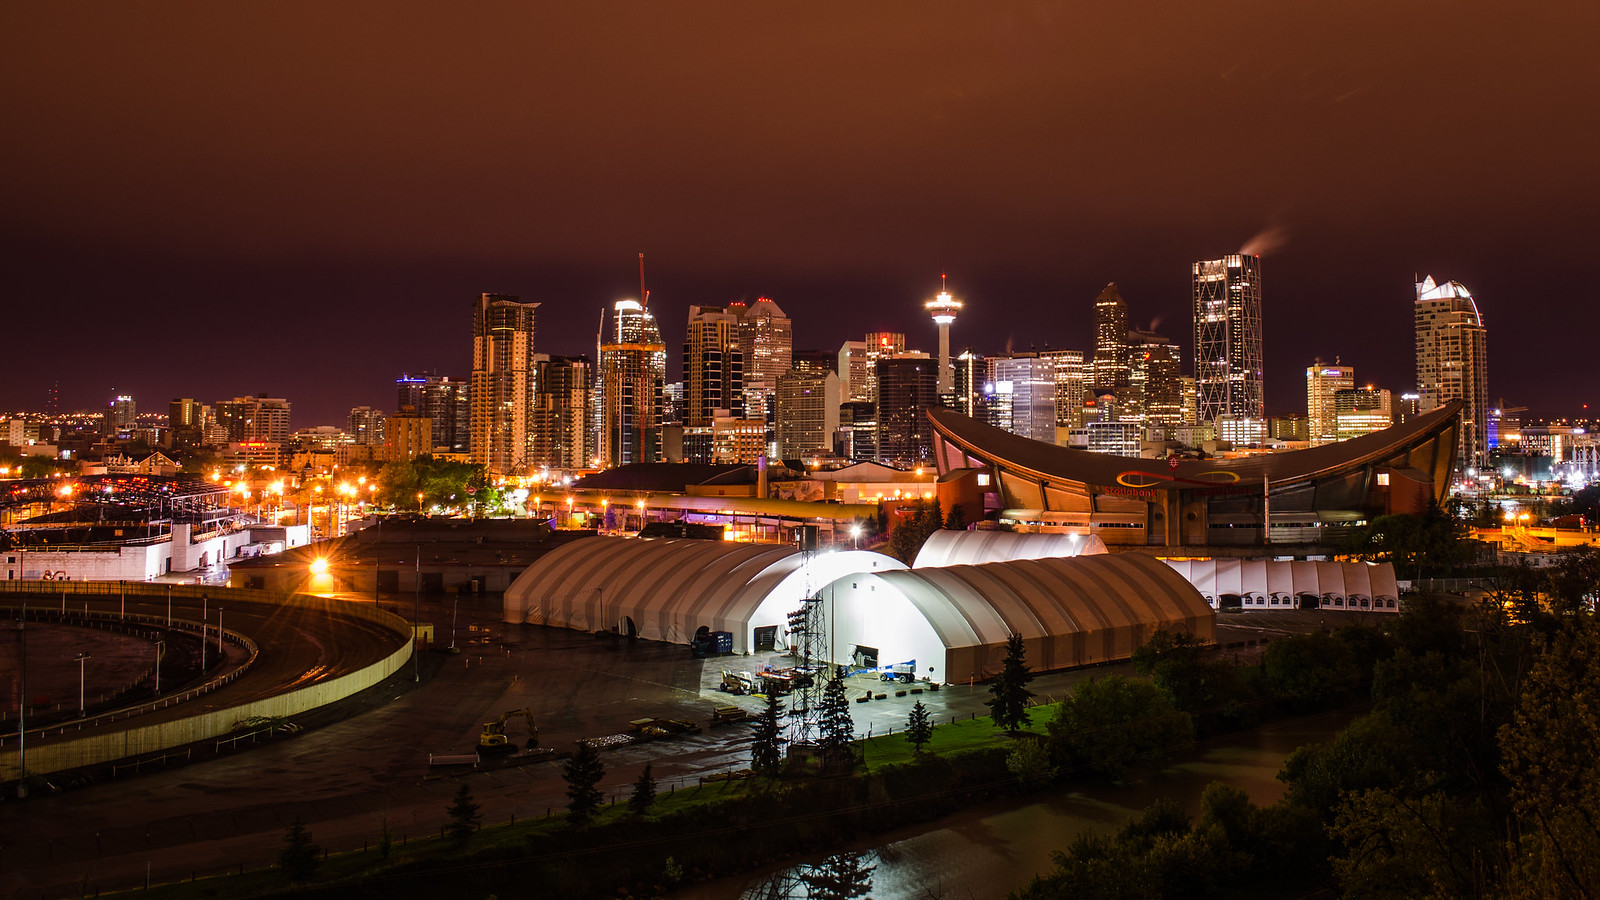 Calgary, one of the top cities to visit in Canada